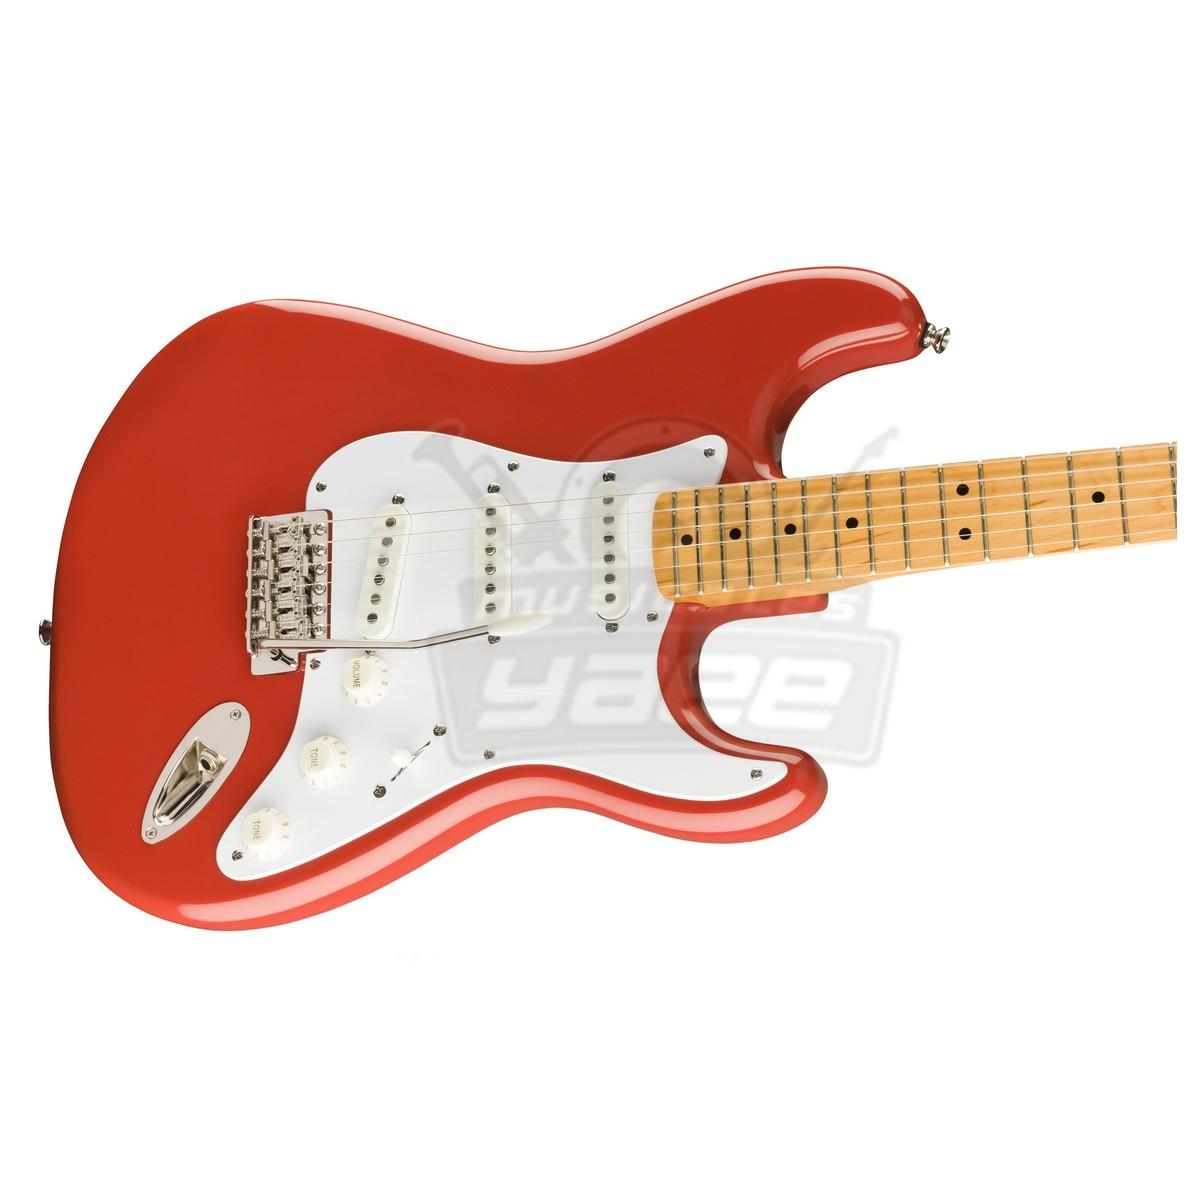 GUITARRA ELECTRICA FENDER SQUIER CLASSIC VIBE 50S STRATOCASTER MN FIESTA RED